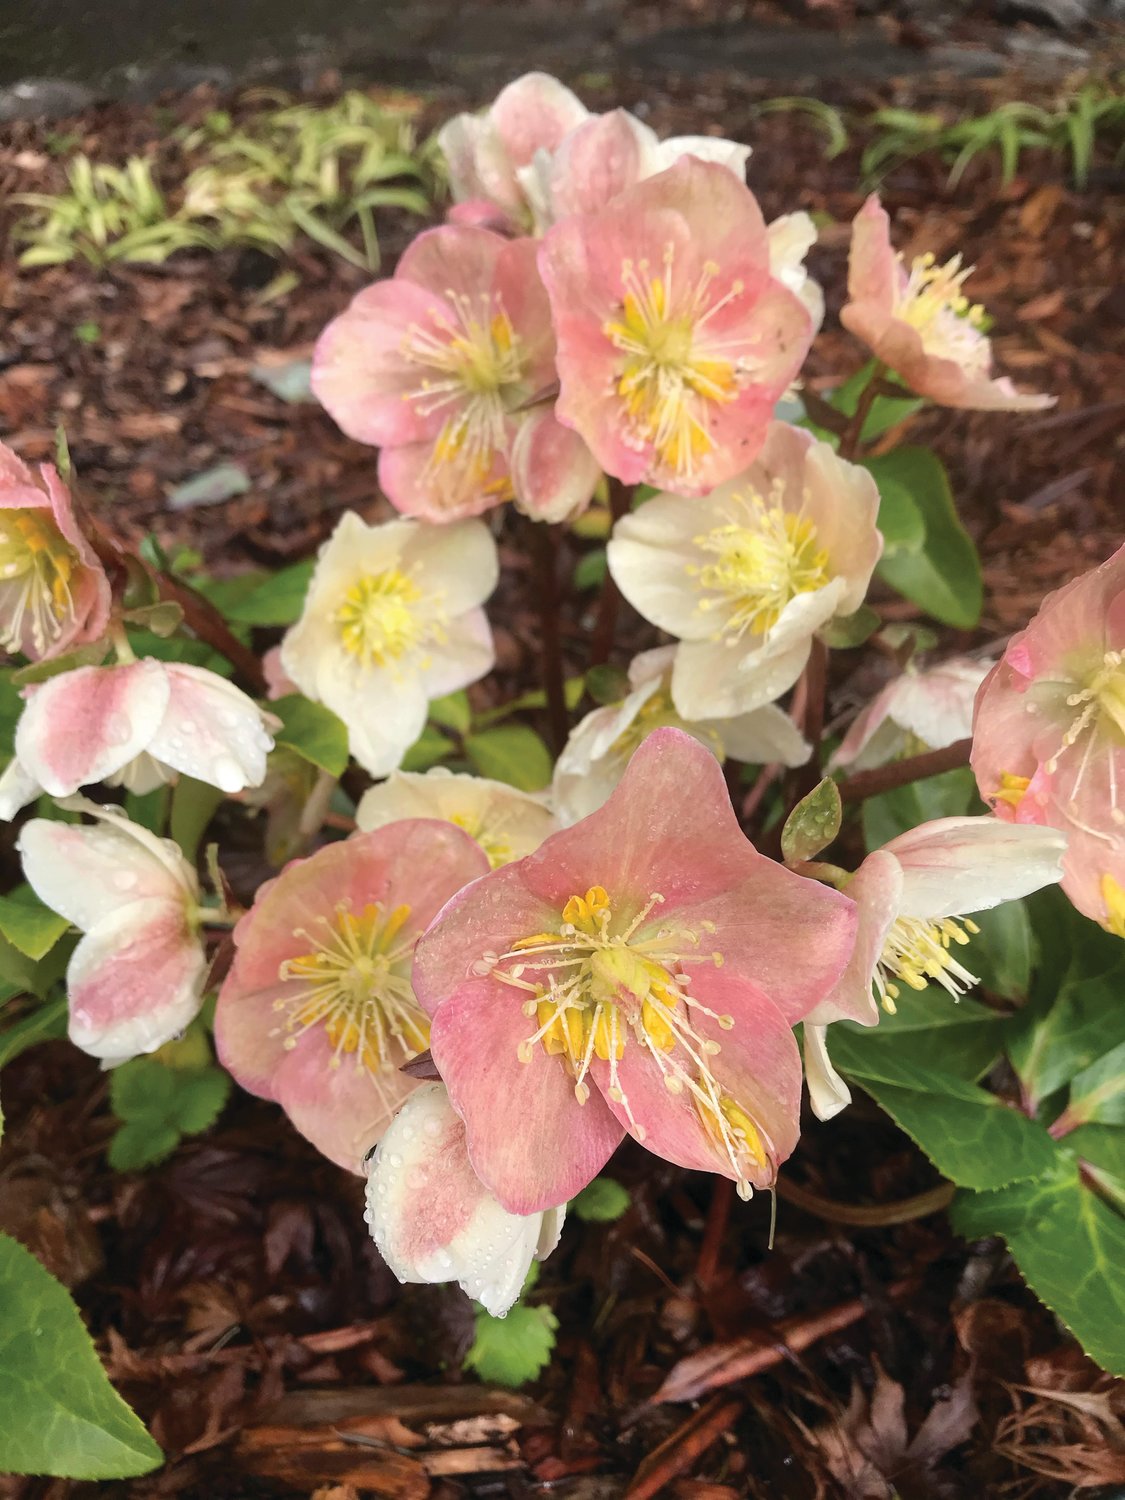 It’s easiest to save seeds from annuals, but biennials and perennials like this winter-blooming hellebore will also produce seeds that can be saved for replanting.